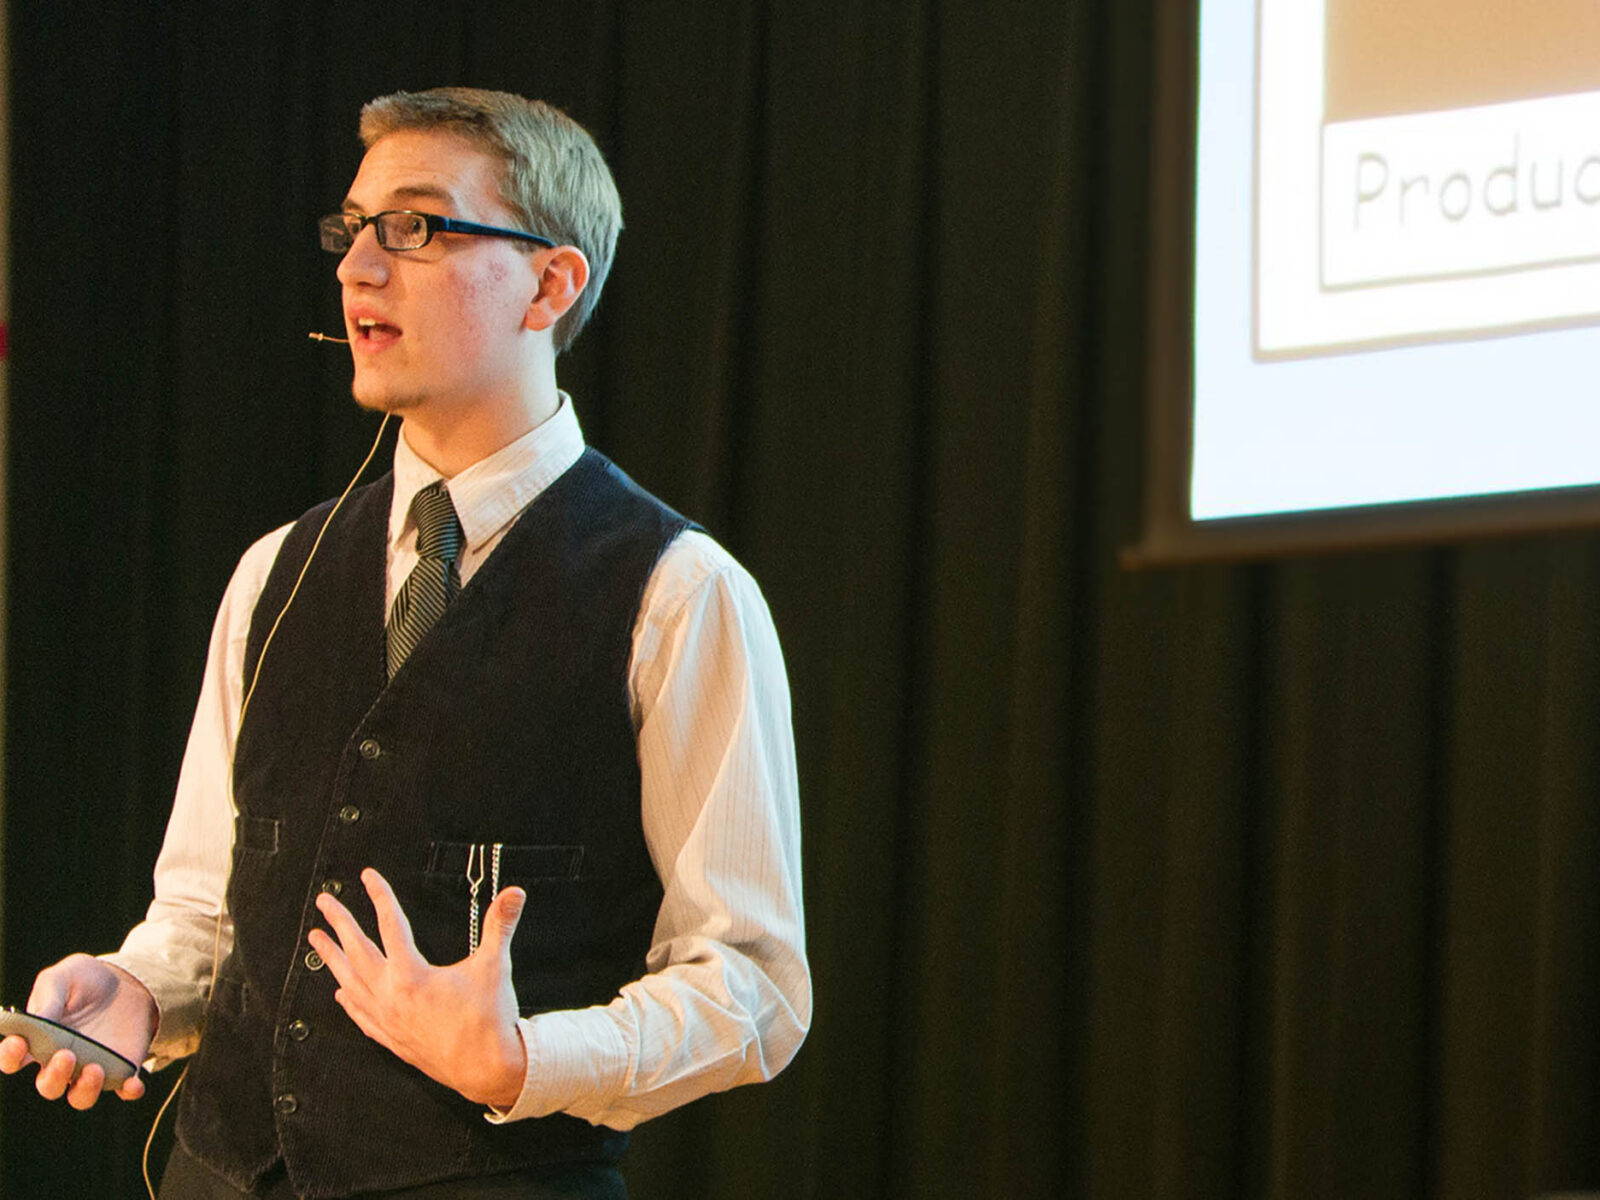 a game business student delivering a game presentation at a large event